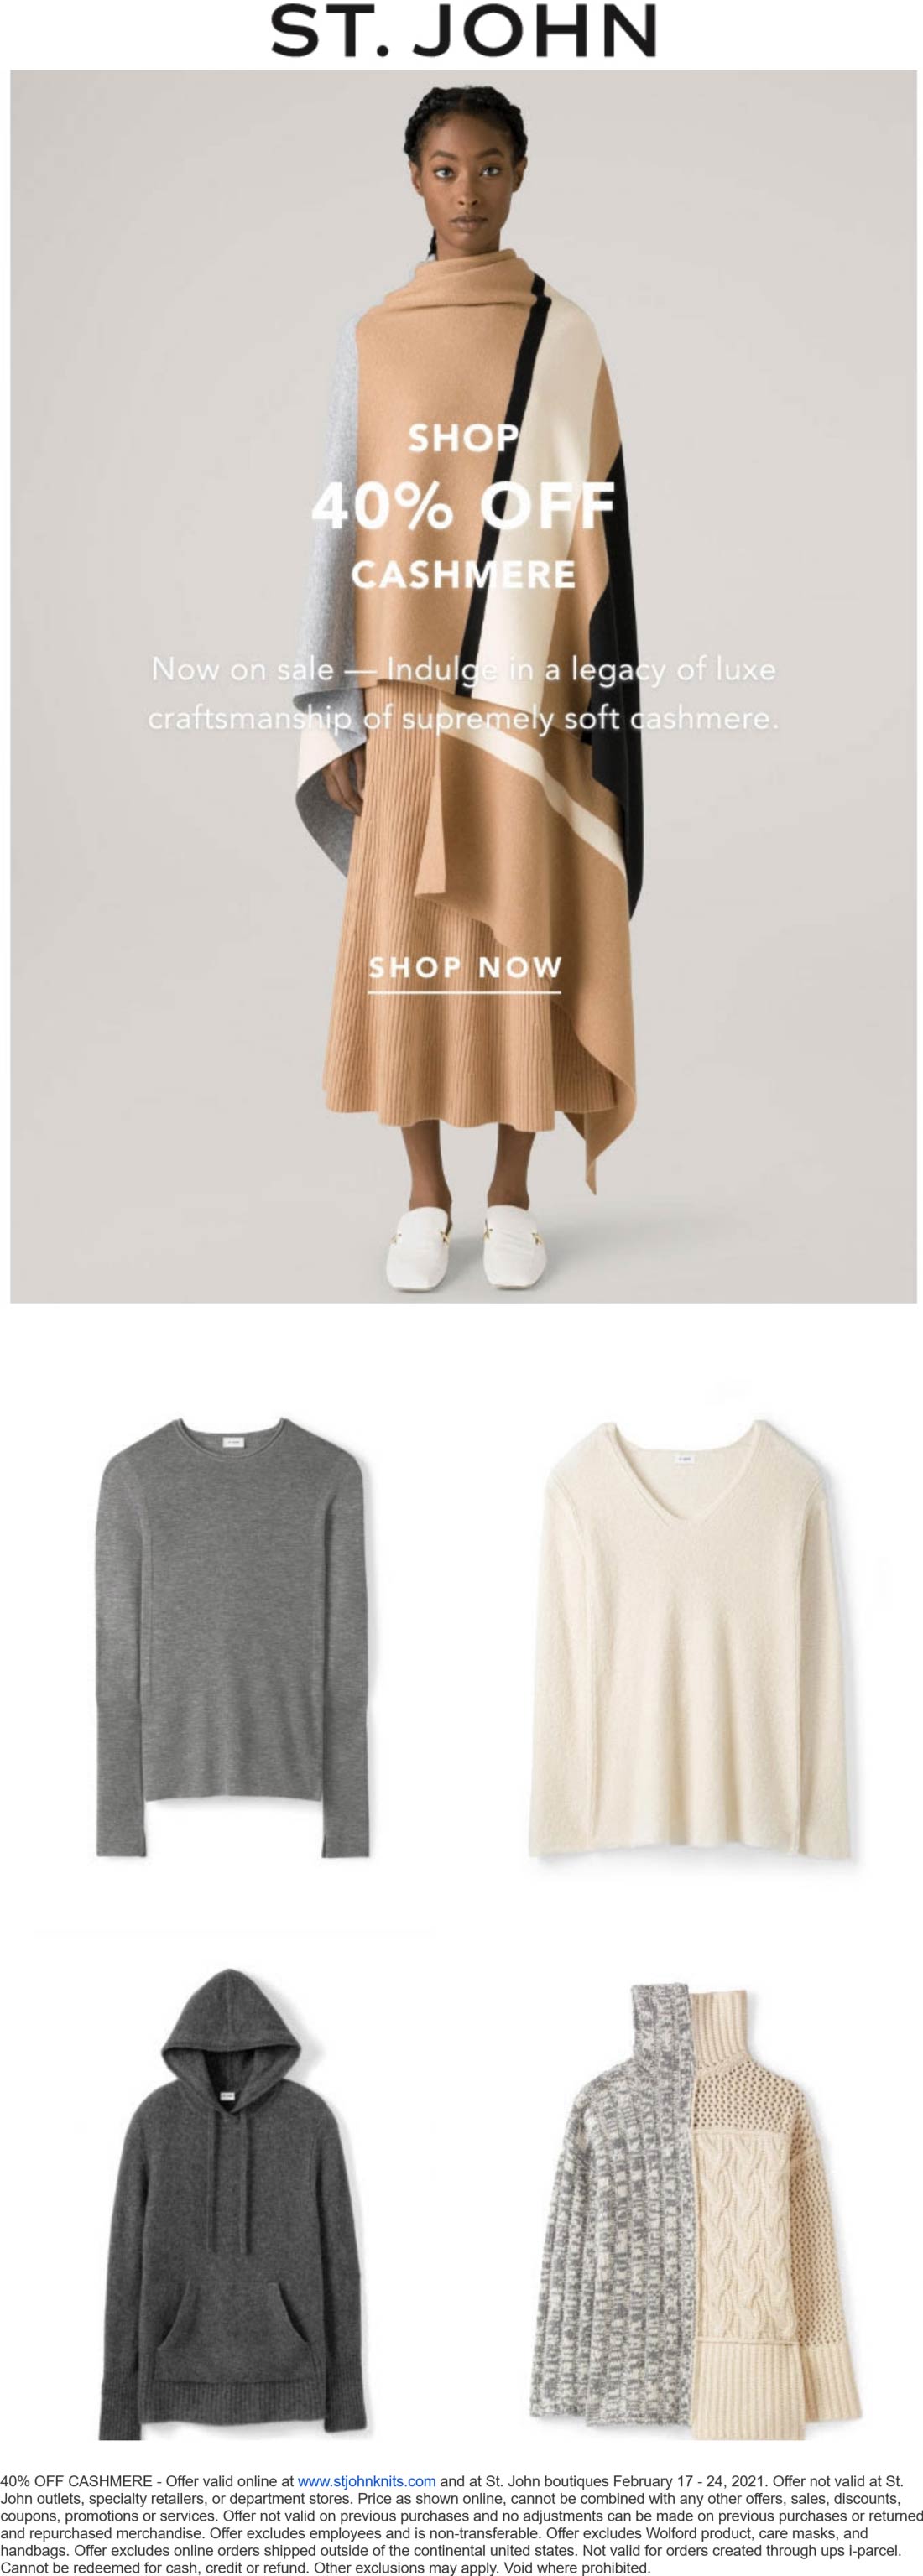 St. John stores Coupon  40% off cashmere at St. John knits, ditto online #stjohn 